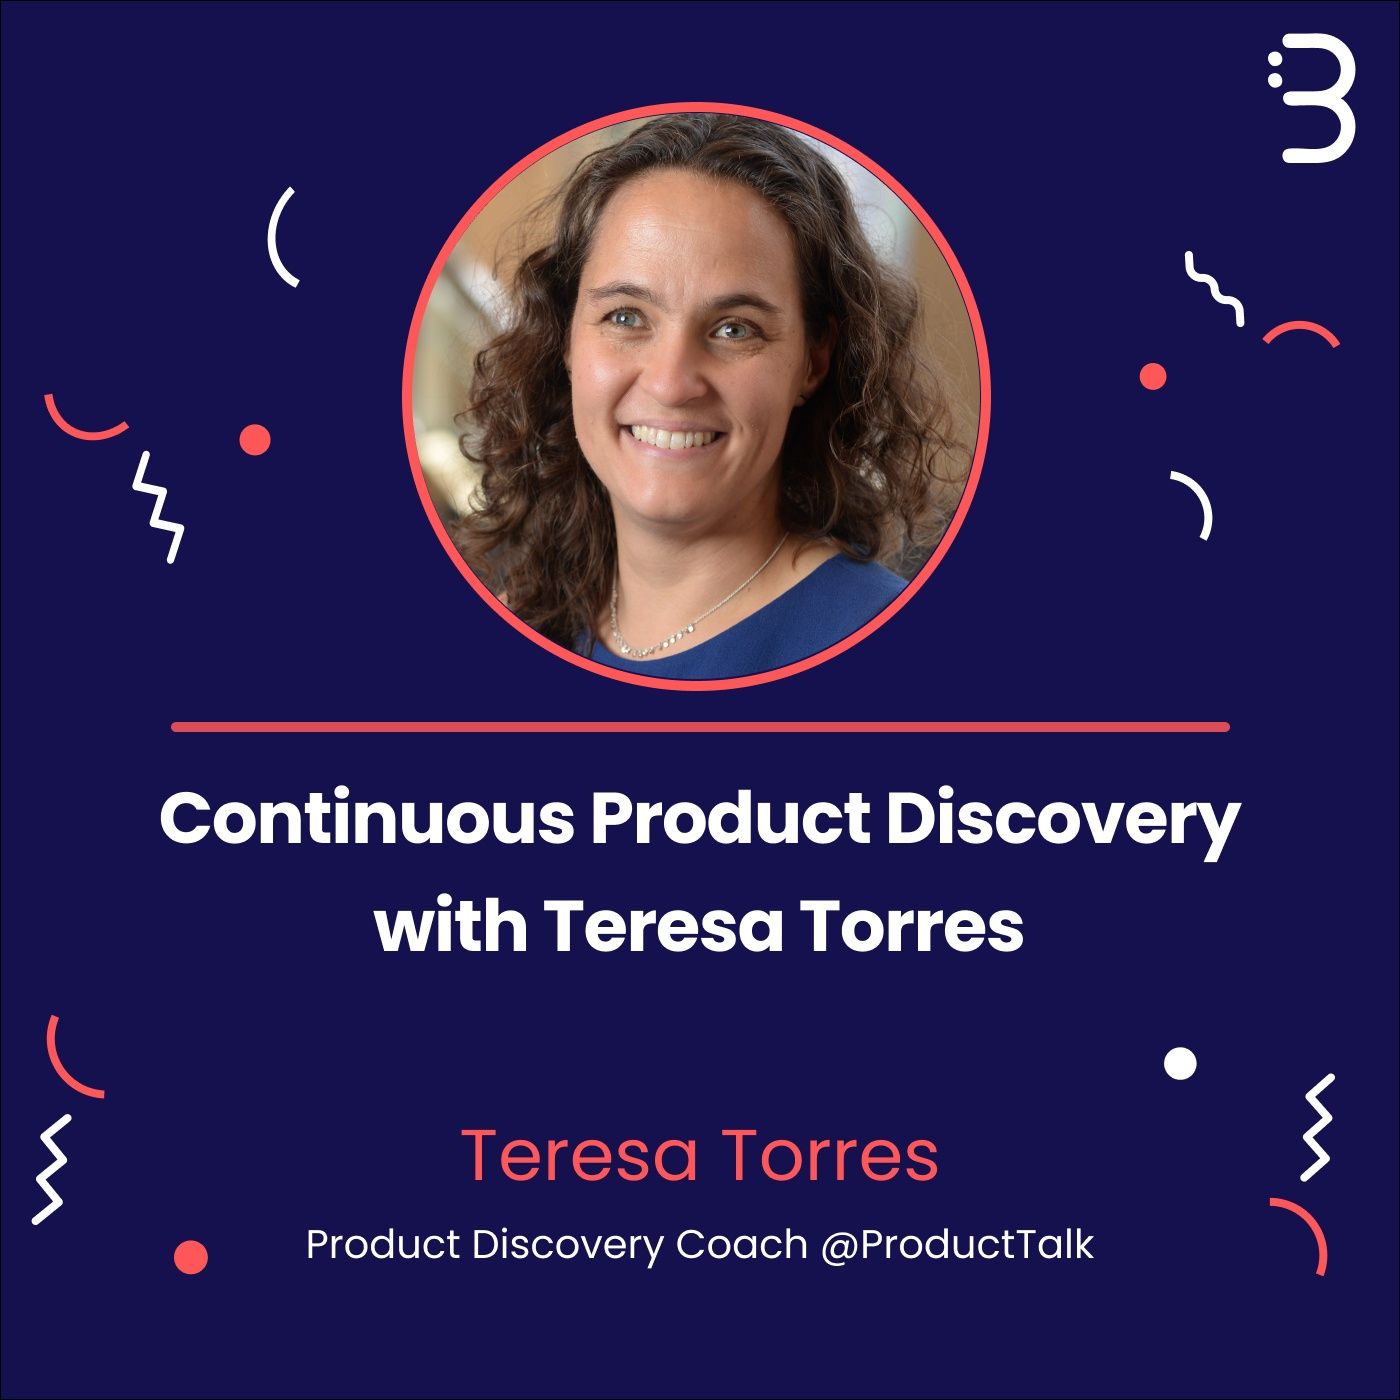 Continuous Product Discovery with Teresa Torres